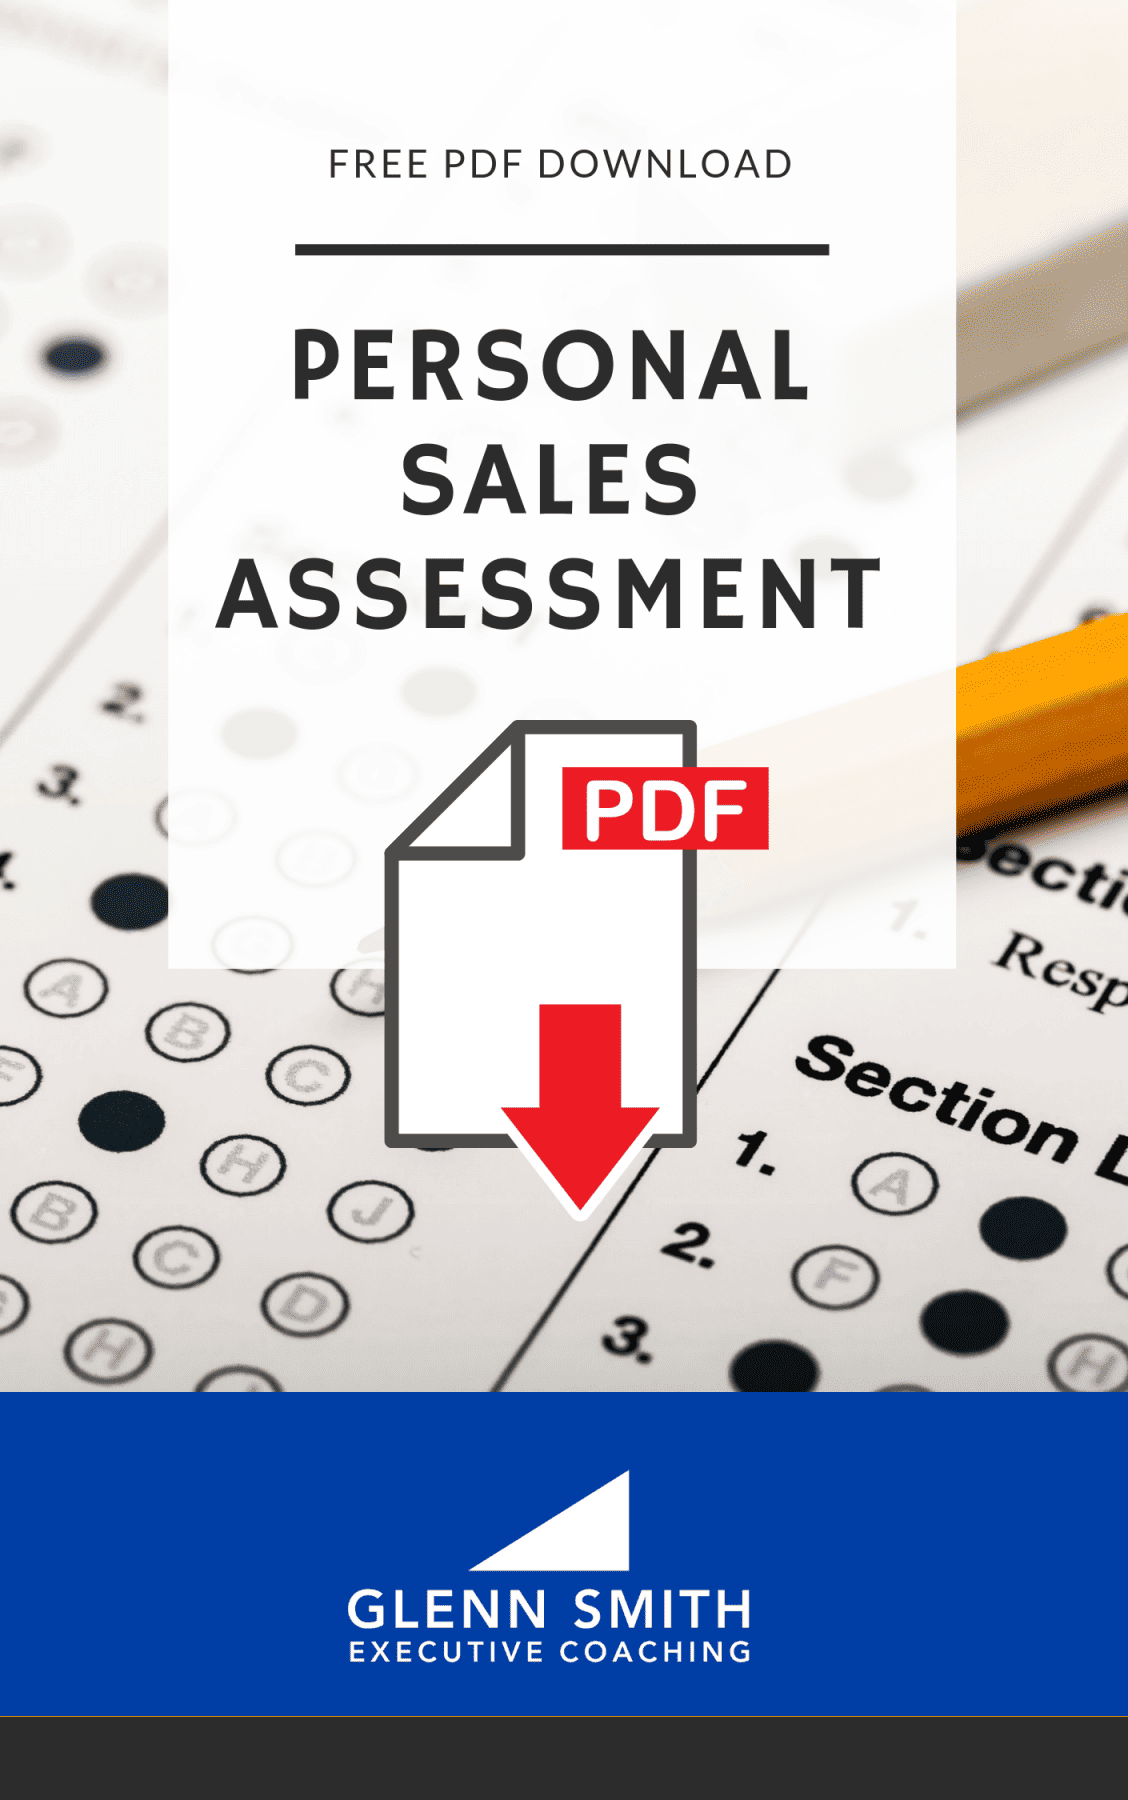 personal sales assessment_image